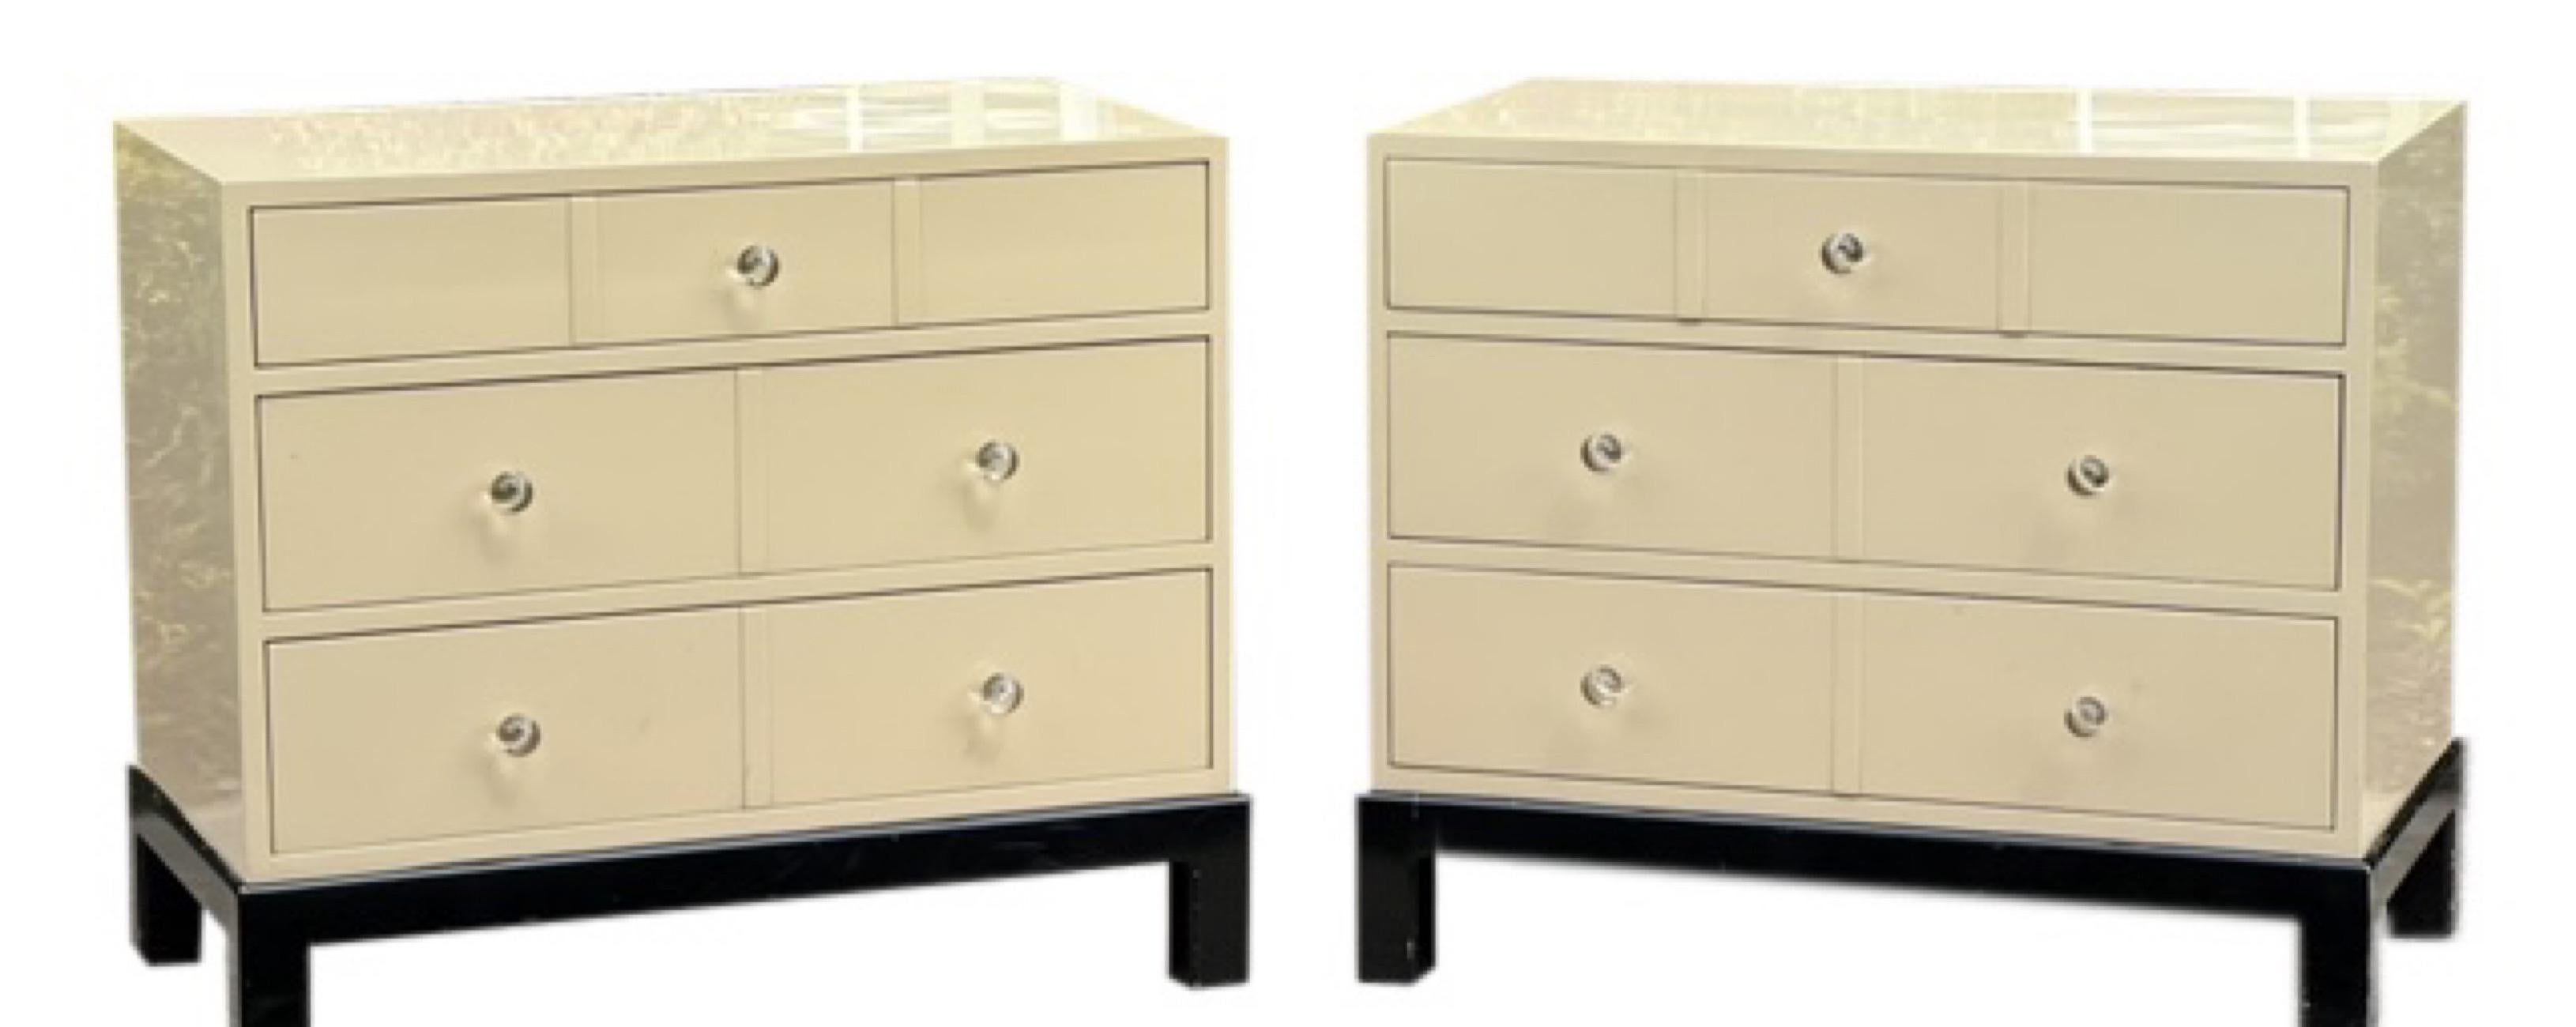 Beautiful pair of 1970's three drawer nightstands or chests with lucite knobs. The finish is a glossy pale taupe lacquer with black bases and finished backs. The pair is well crafted and in very good condition showing little signs of use. Modern and